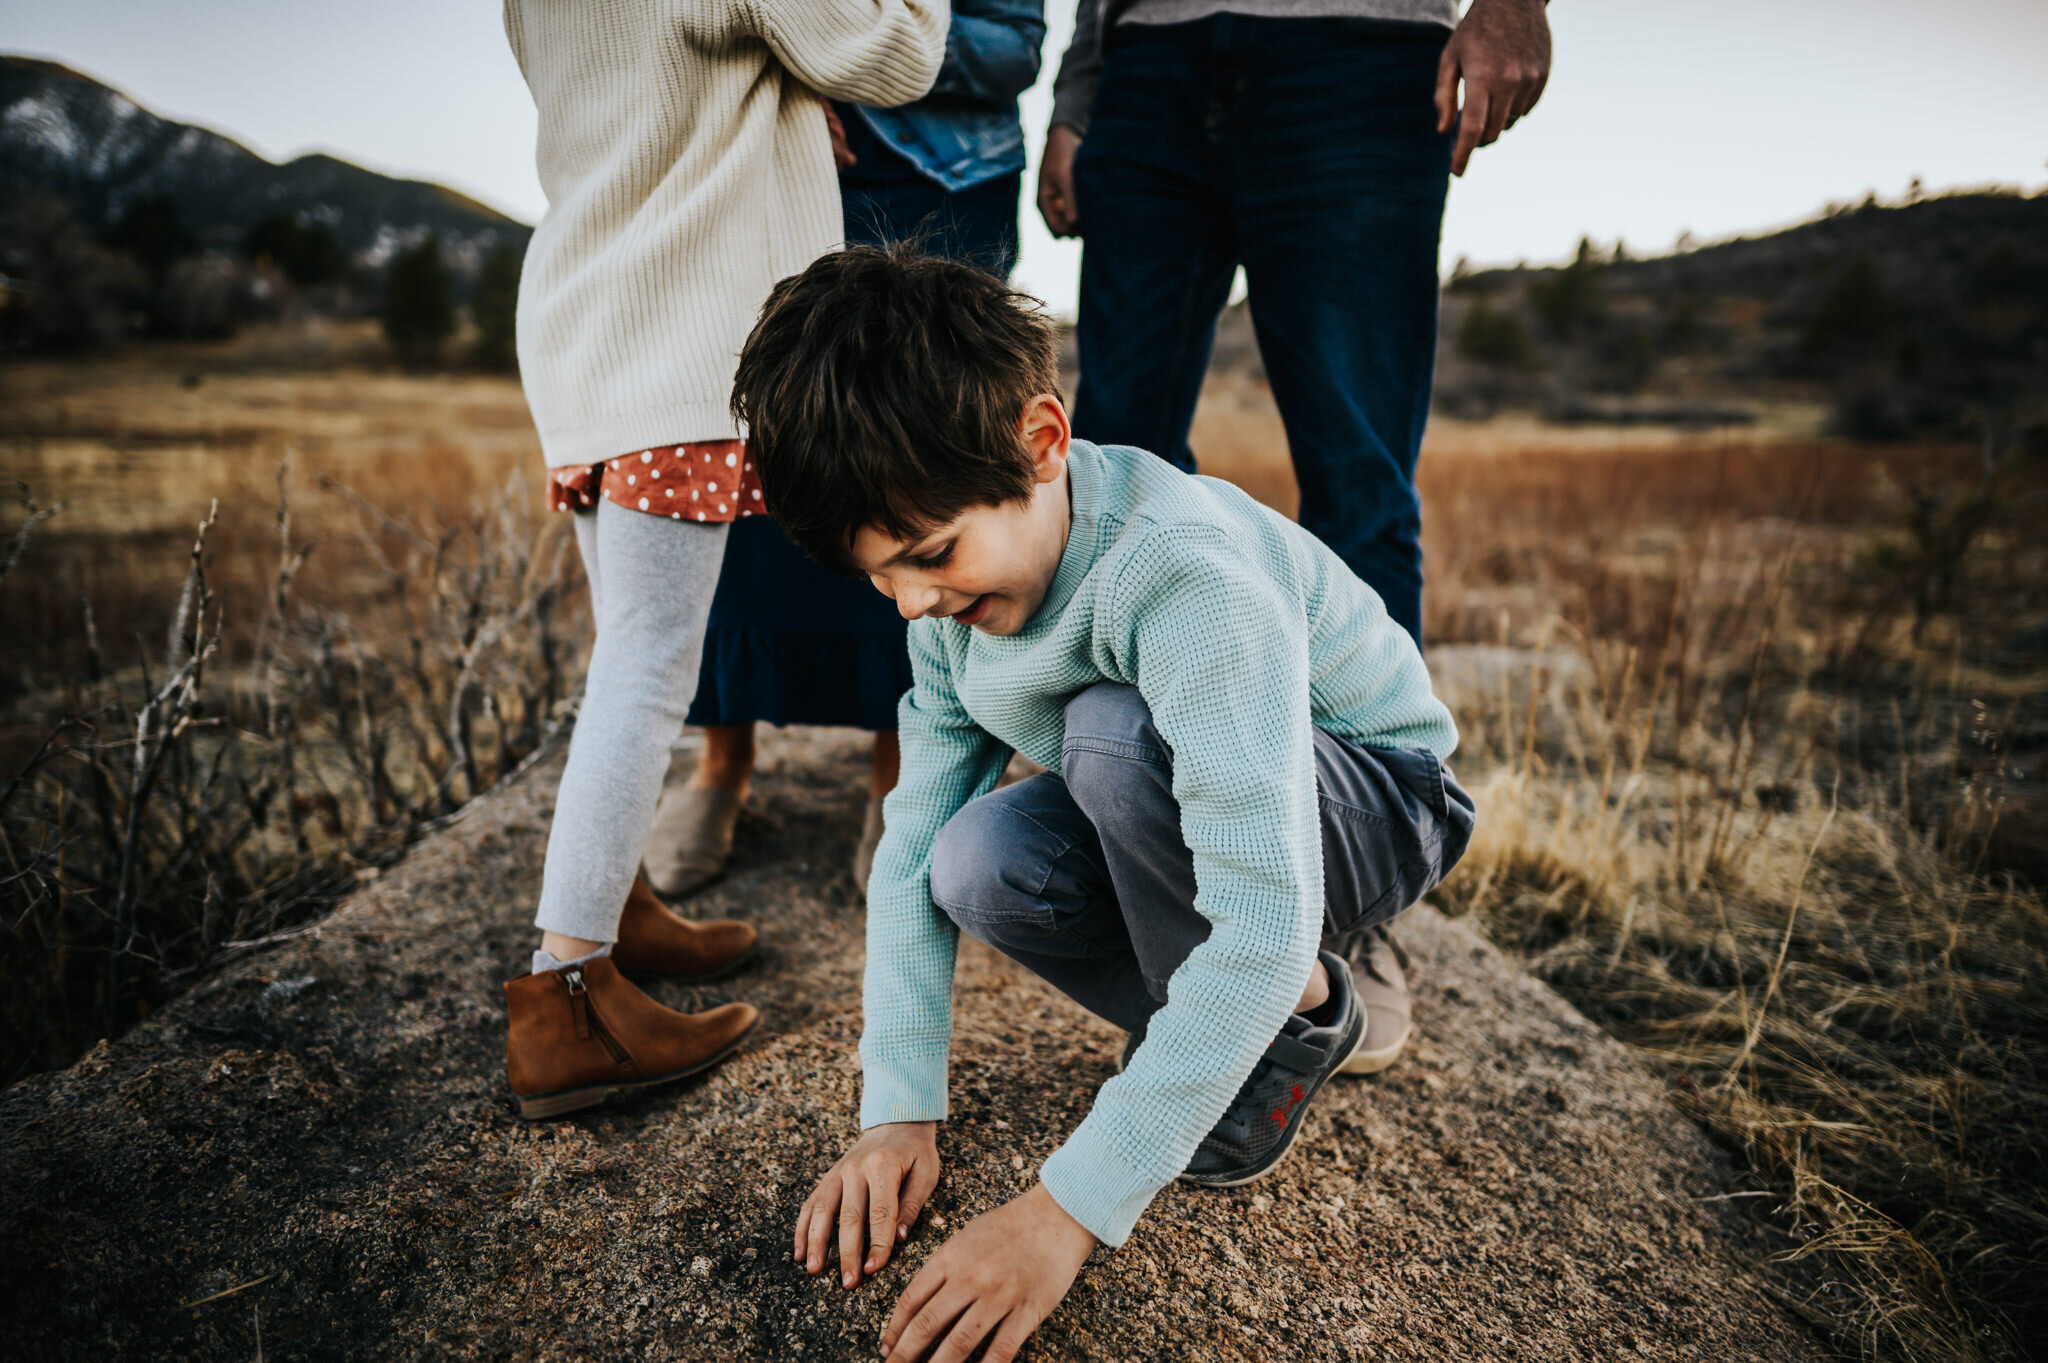 Lisa Liberati Family Session Colorado Springs Photographer Sunset Cheyenne Canyon Mother Father Son Daughter Wild Prairie Photography-10-2020.jpg